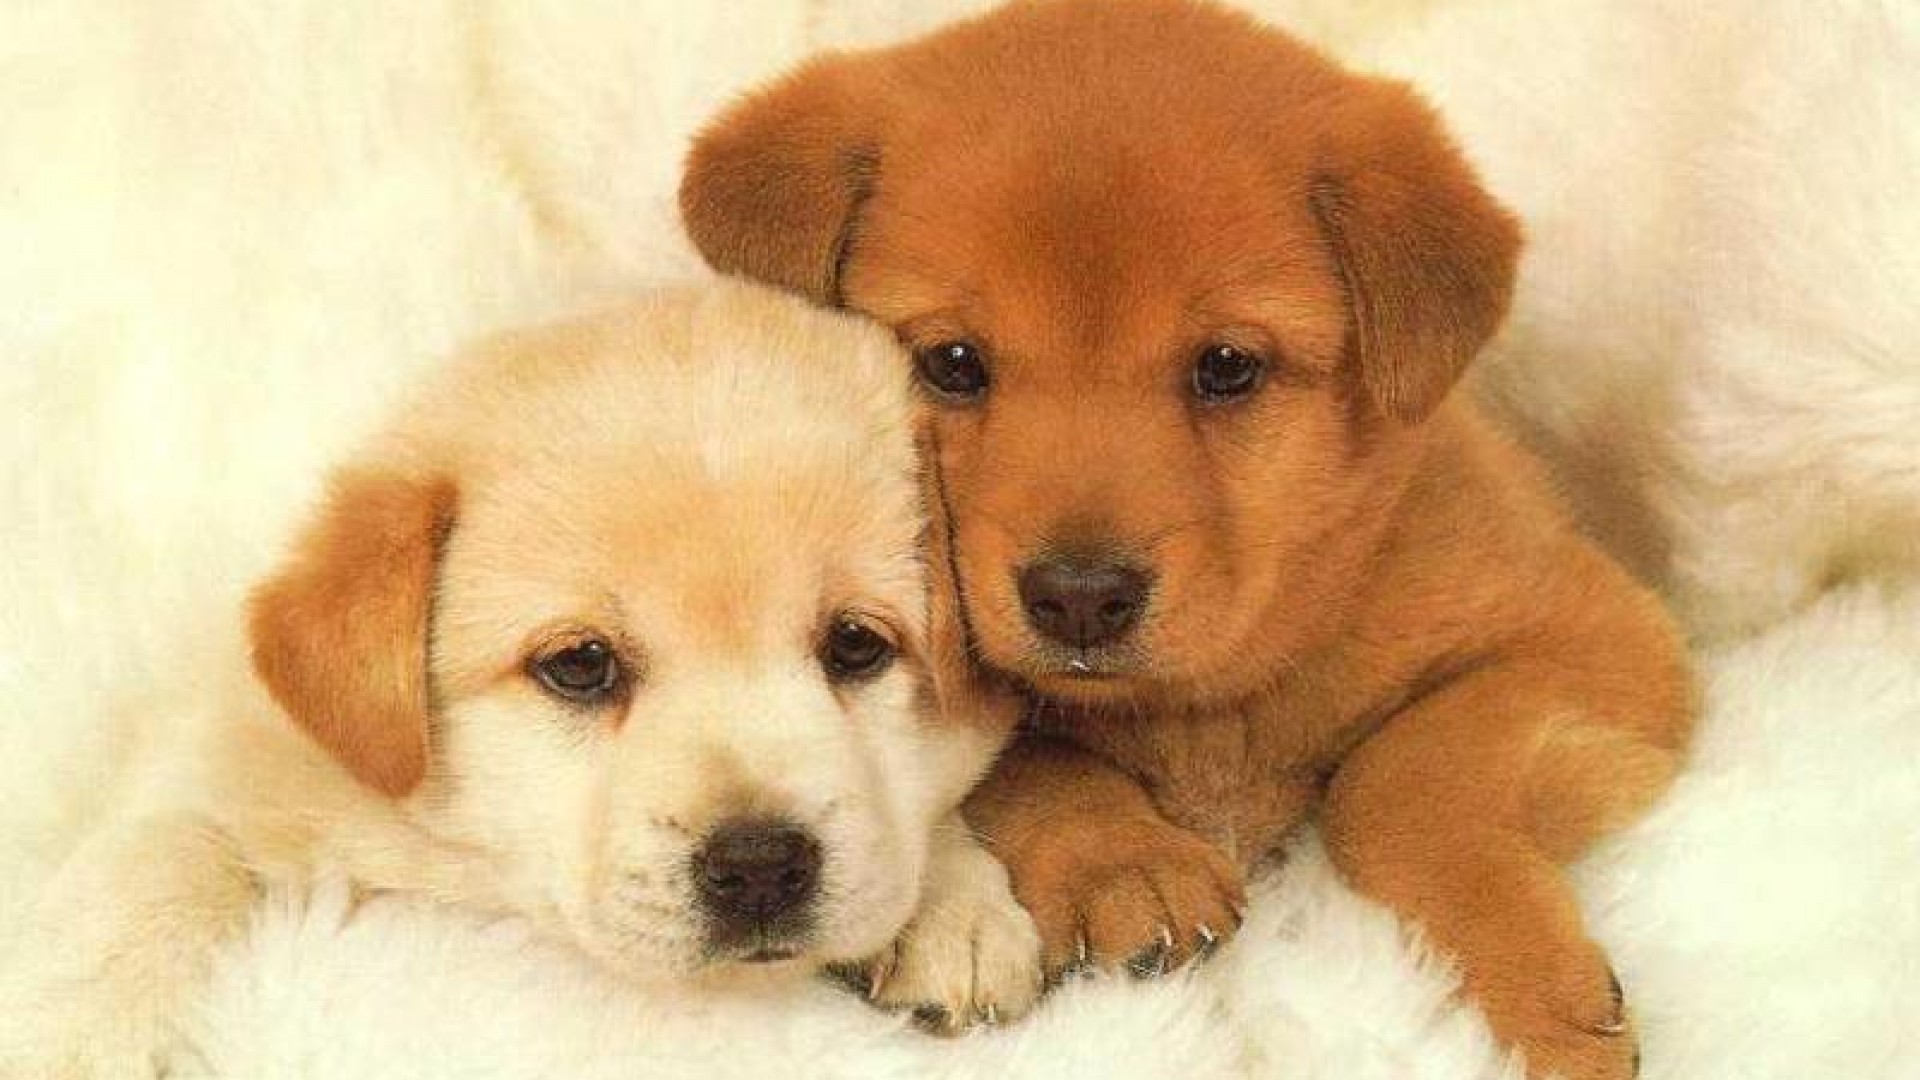 Puppy wallpaper doggy wallpapers